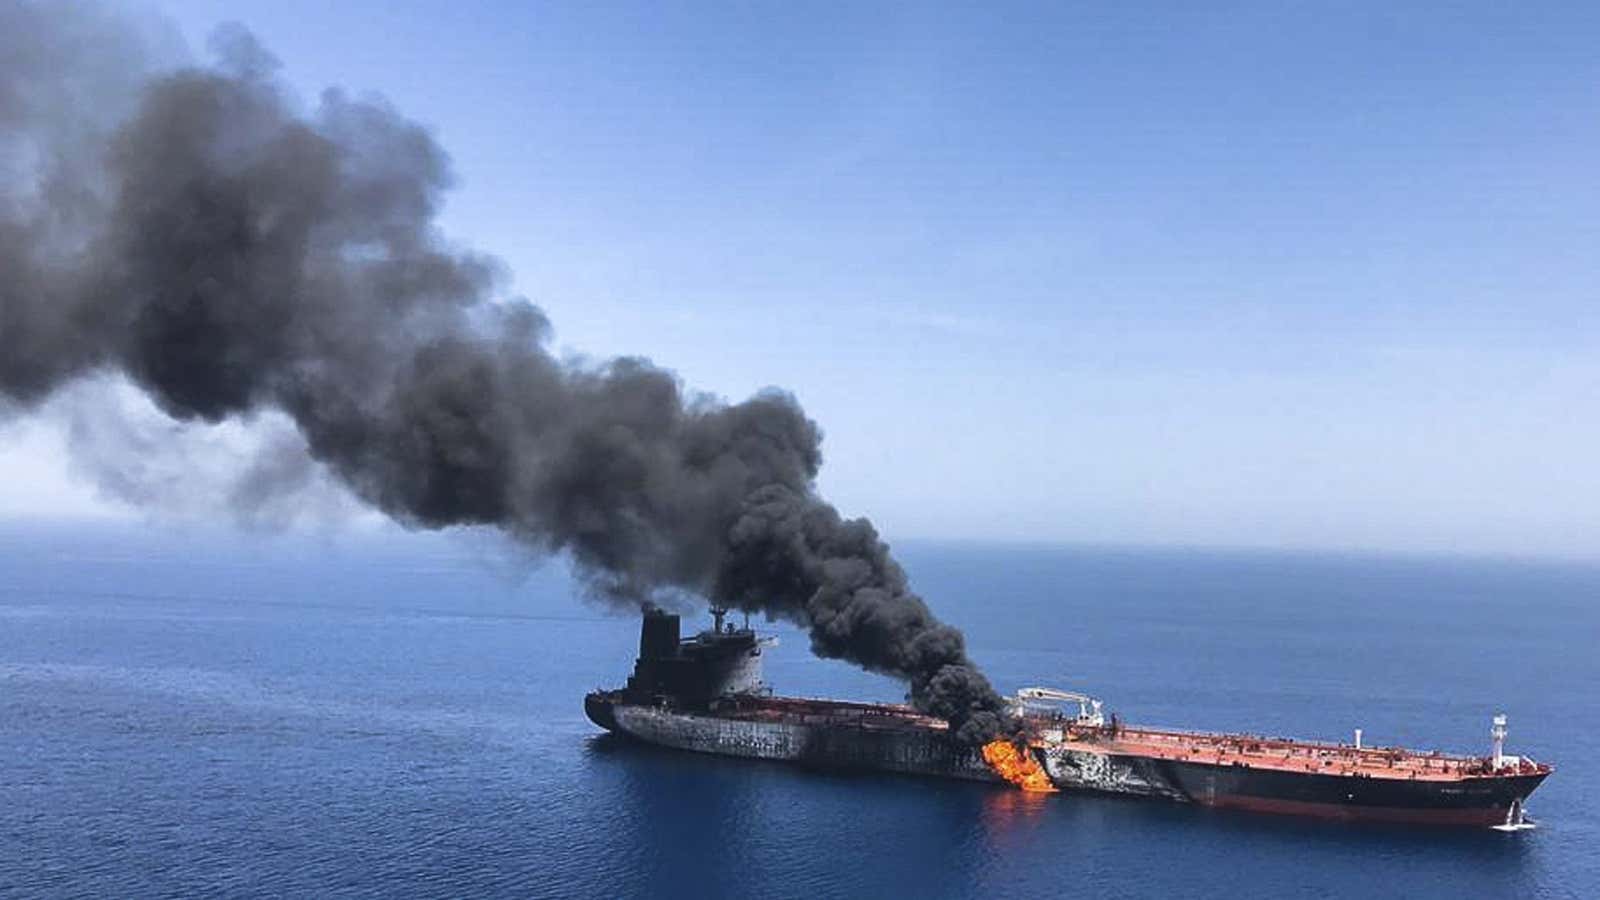 An oil tanker flamed in the sea of Oman, following reported attacks on two ships in the Persian gulf.